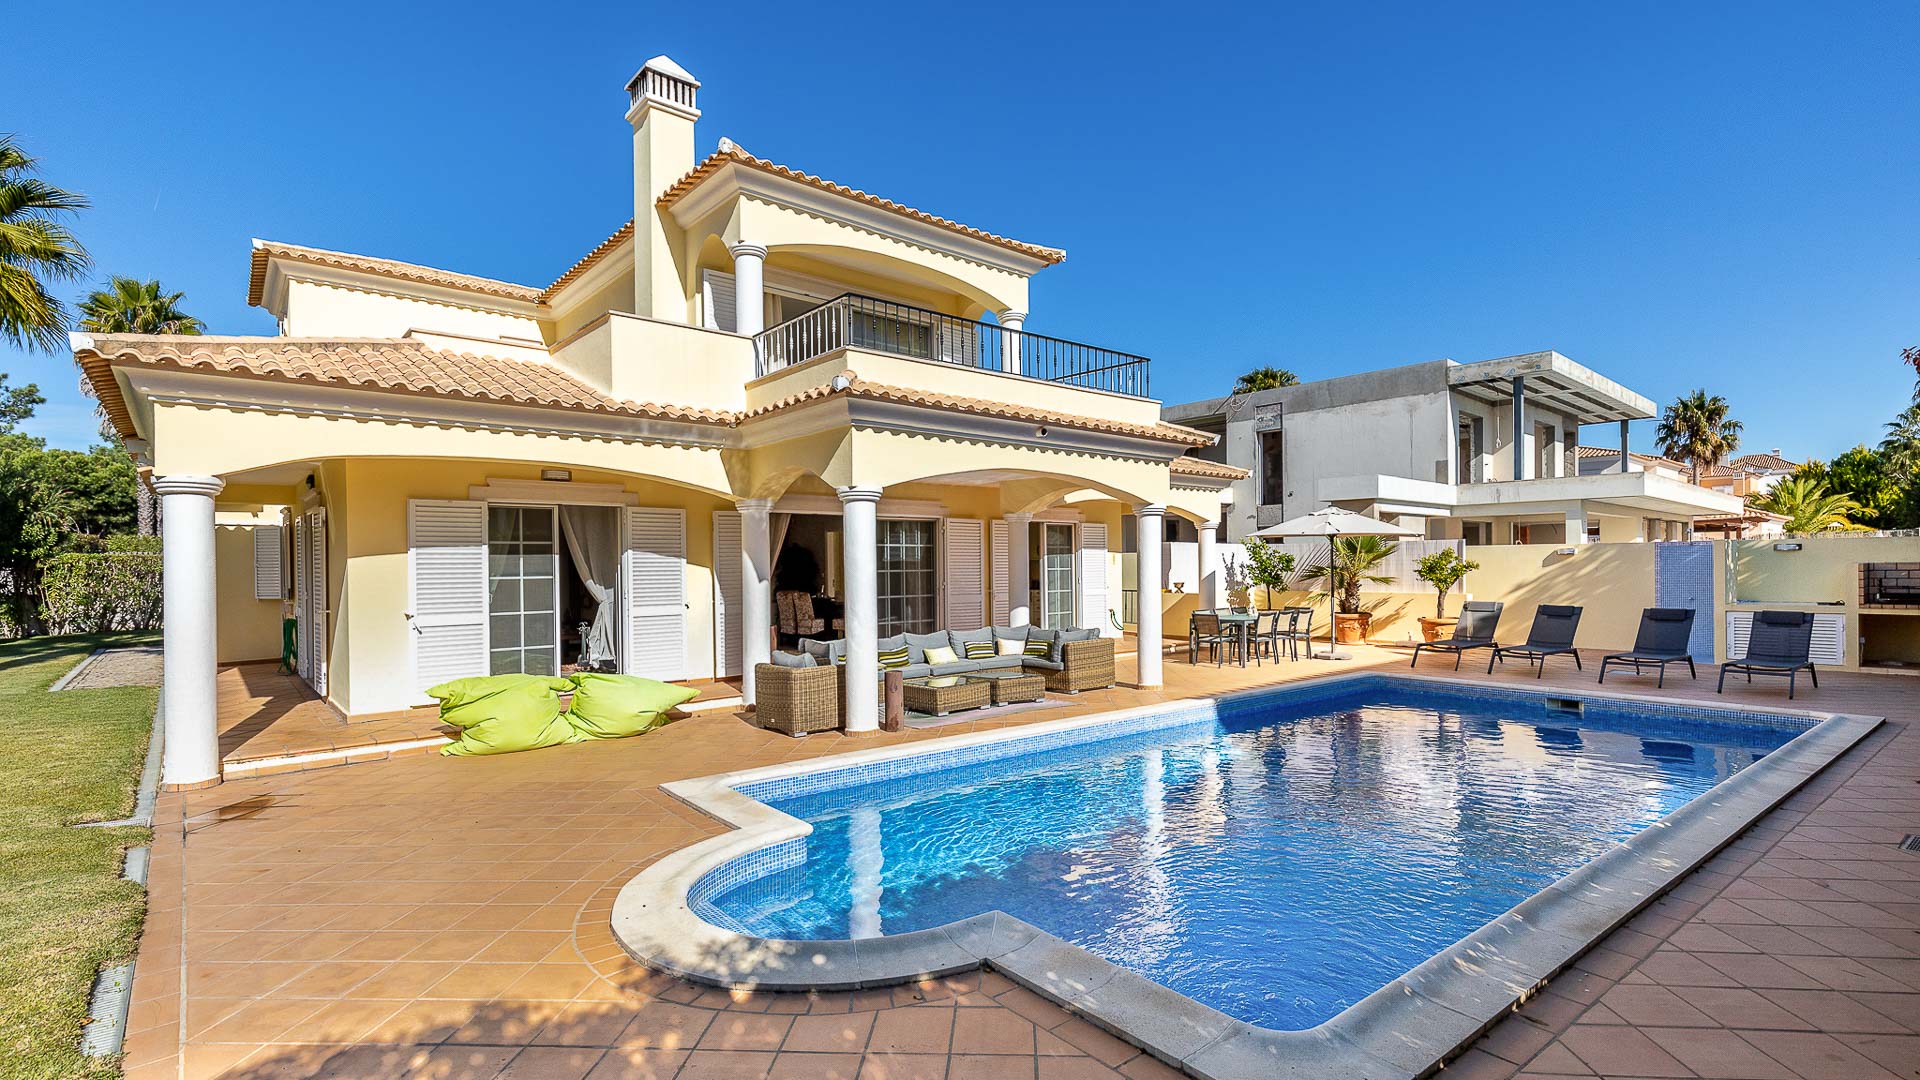 Property Image 2 - Simple Beauty in this Vale do Lobo Rental Villa